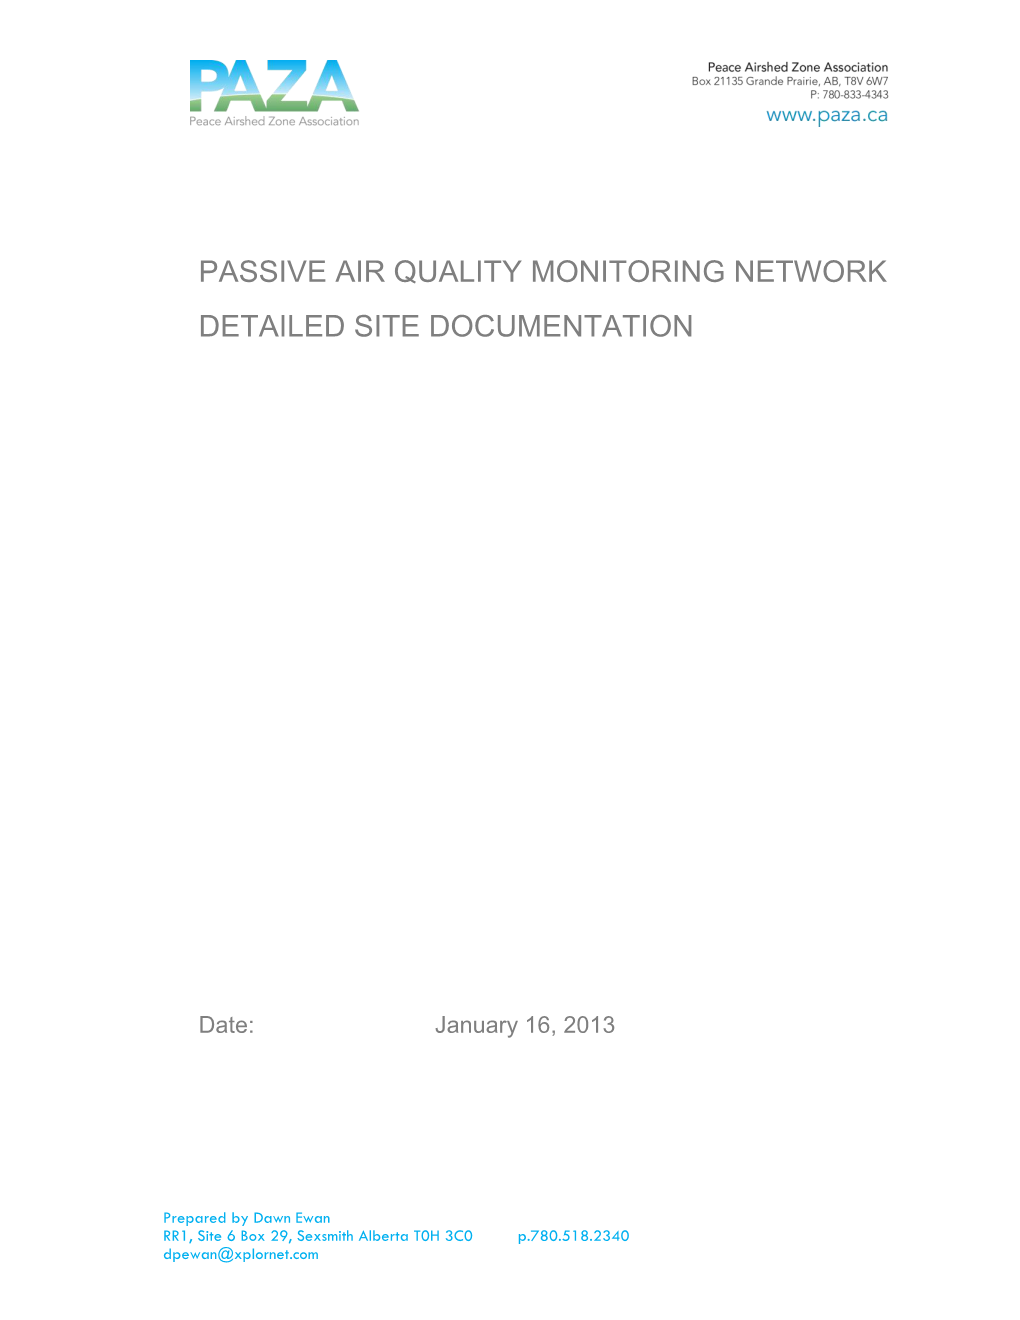 Passive Air Quality Monitoring Network Detailed Site Documentation